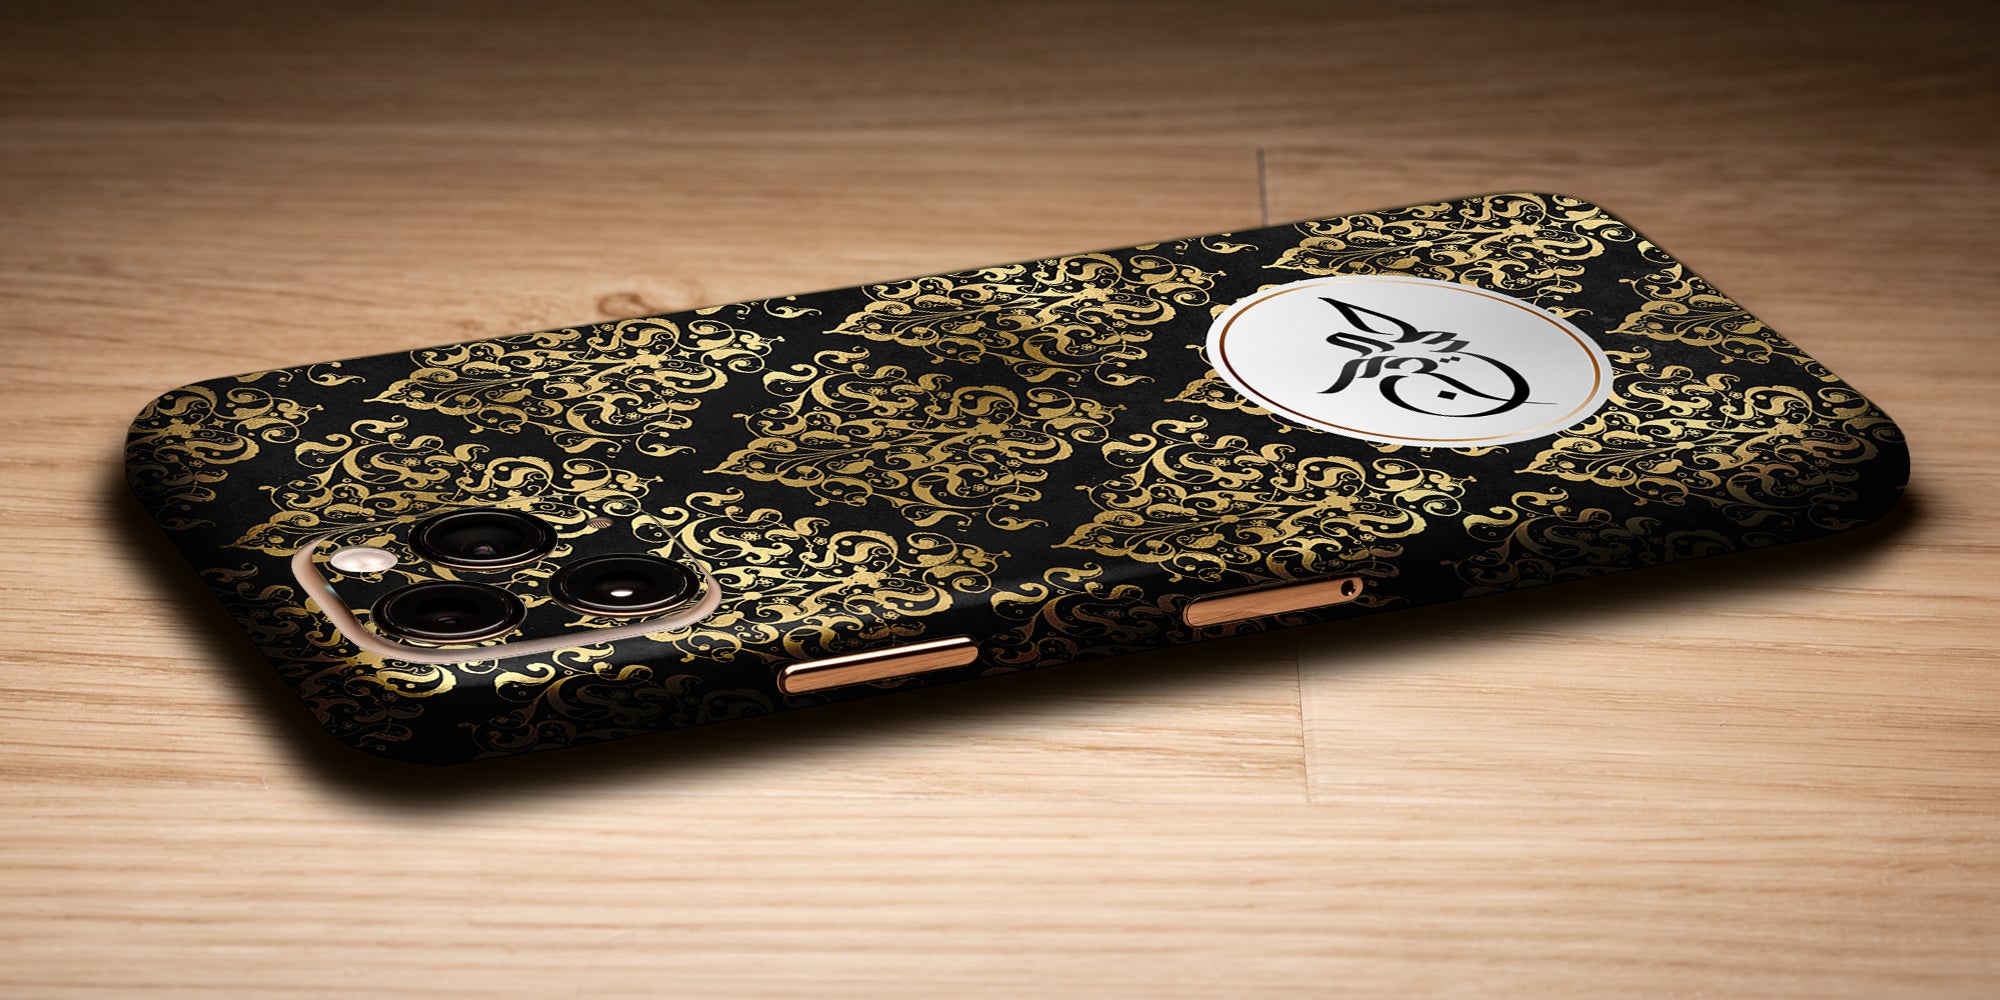 Damask Design Decal Skin With Personalised Arabic Name Phone Wrap - Black / Gold